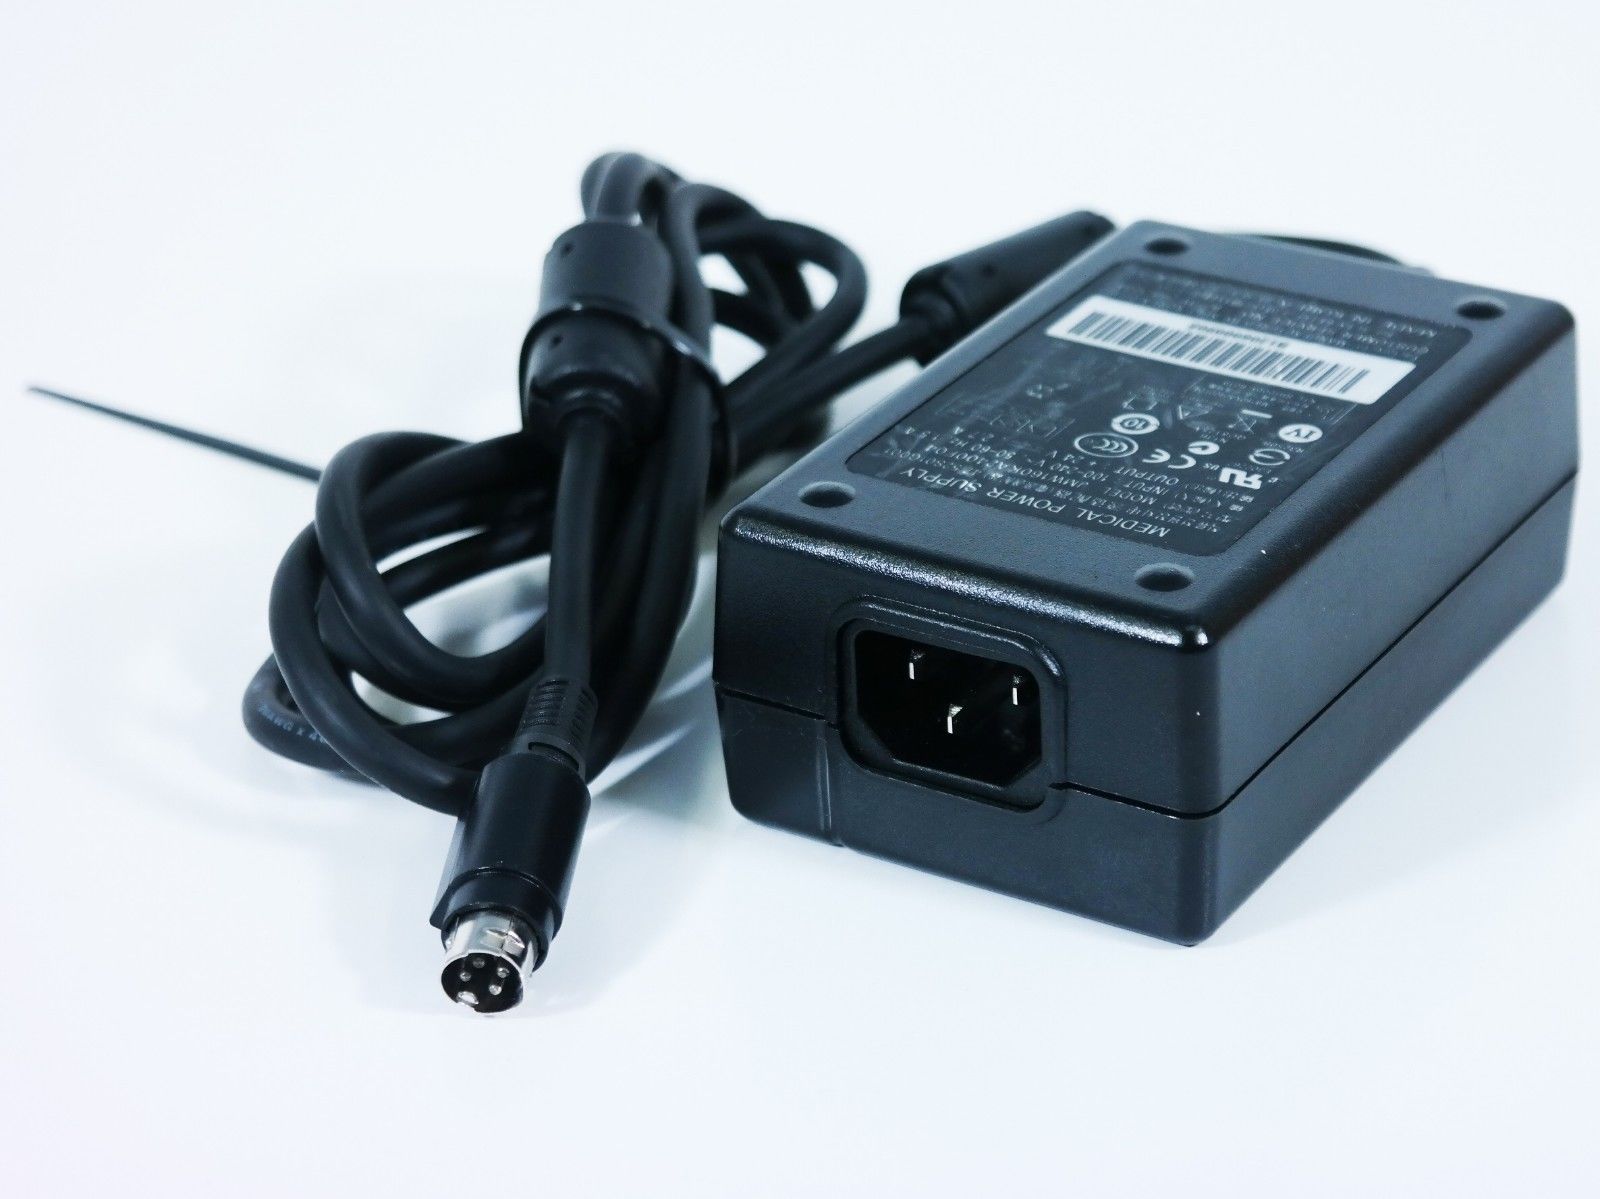 New 24V 2.7A ac adapter 4 pin for AC/DC Adapter For Barco Eonis MDRC-2221 K9301880A MDRC2221 21"